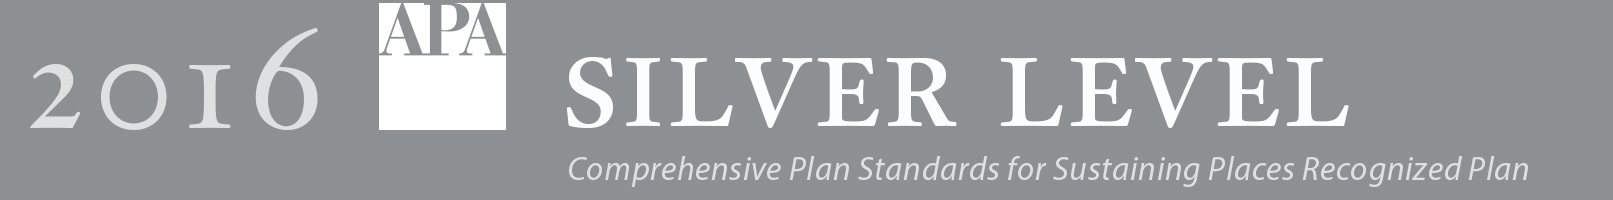 2016 Silver Level Comprehensive Plan Standards for Sustaining Places Recognized Plan